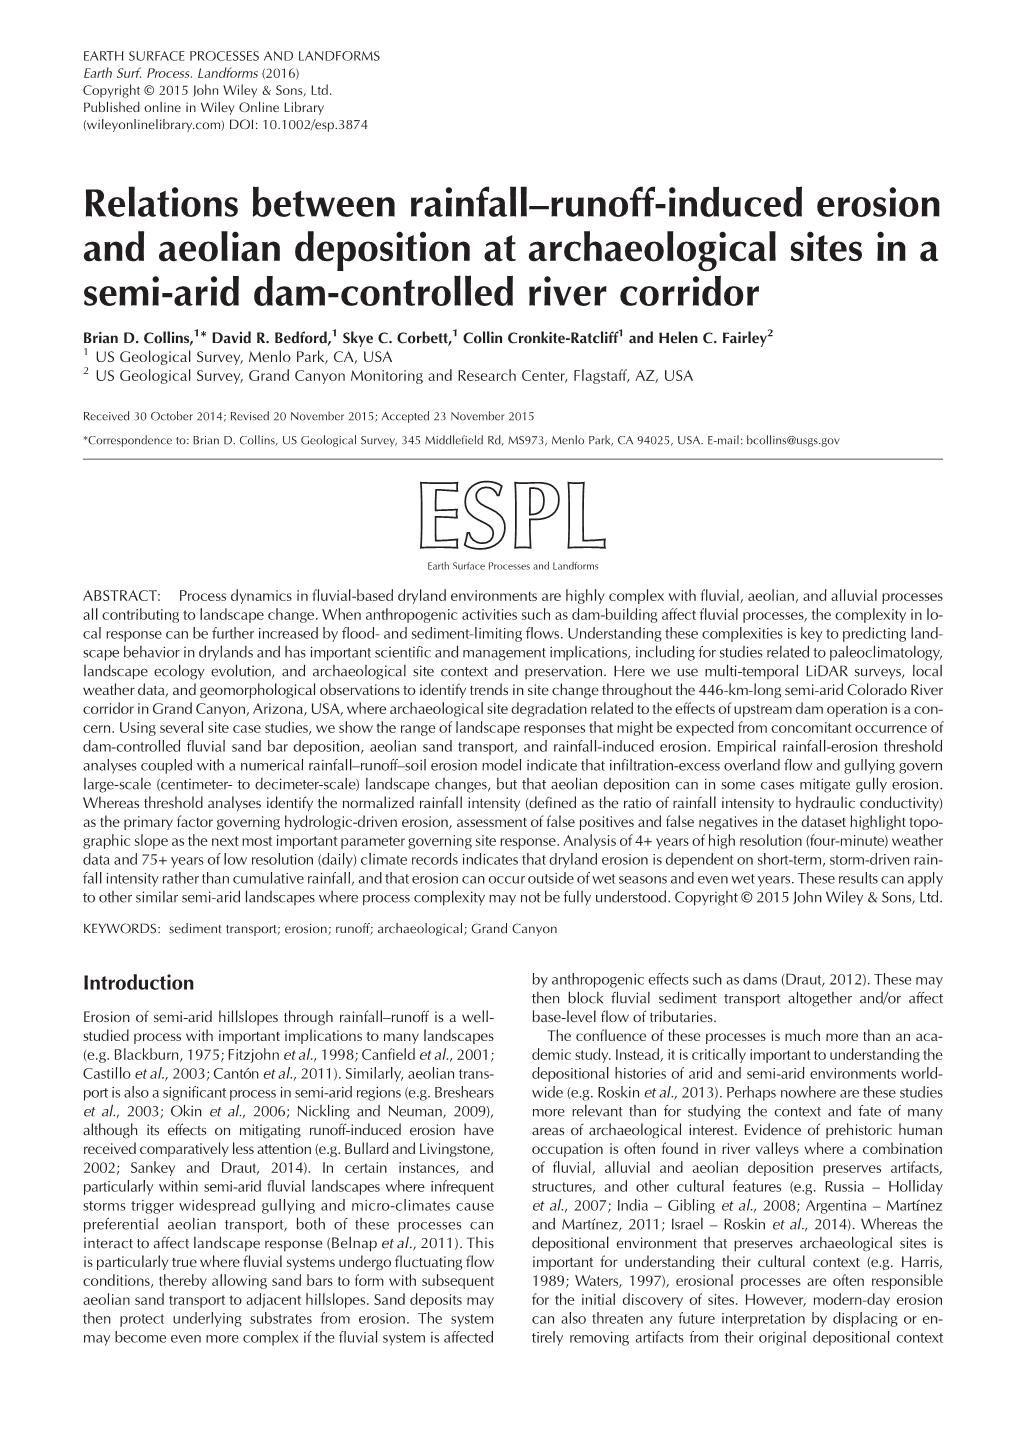 Relations Between Rainfall–Runoff-Induced Erosion and Aeolian Deposition at Archaeological Sites in a Semi-Arid Dam-Controlled River Corridor